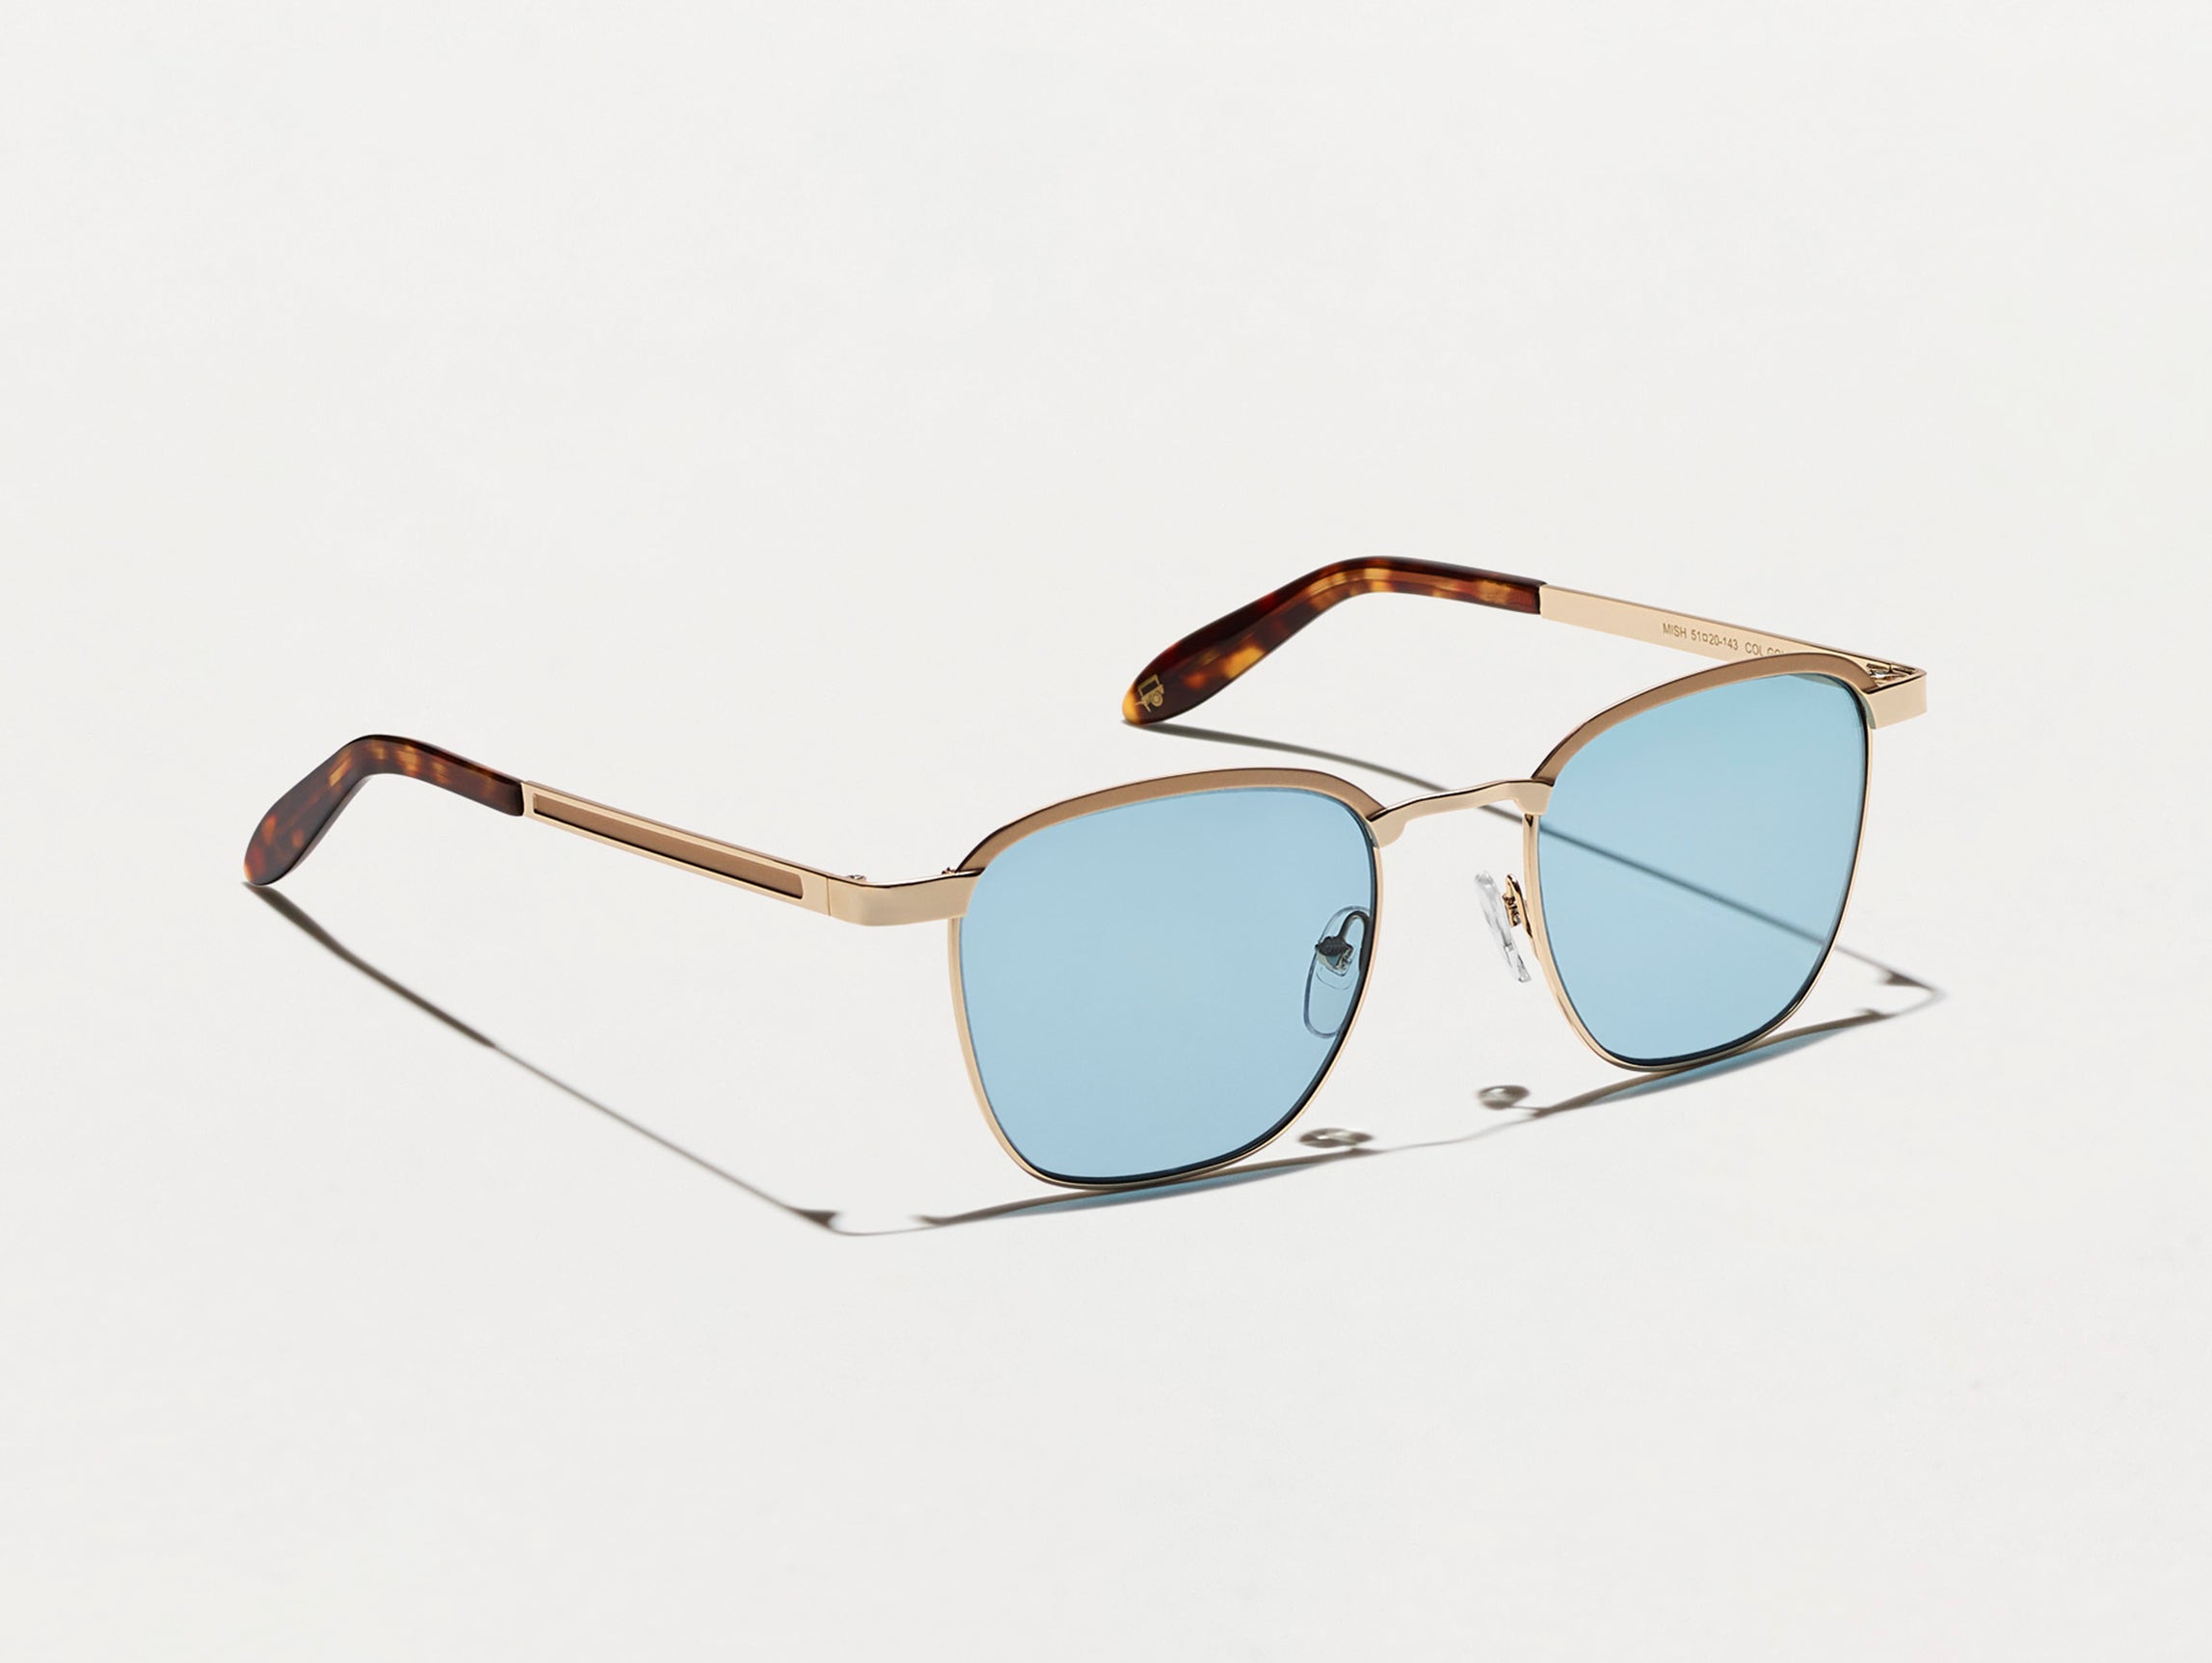 The MISH SUN in Gold with DG-37 Blue Glass Lenses